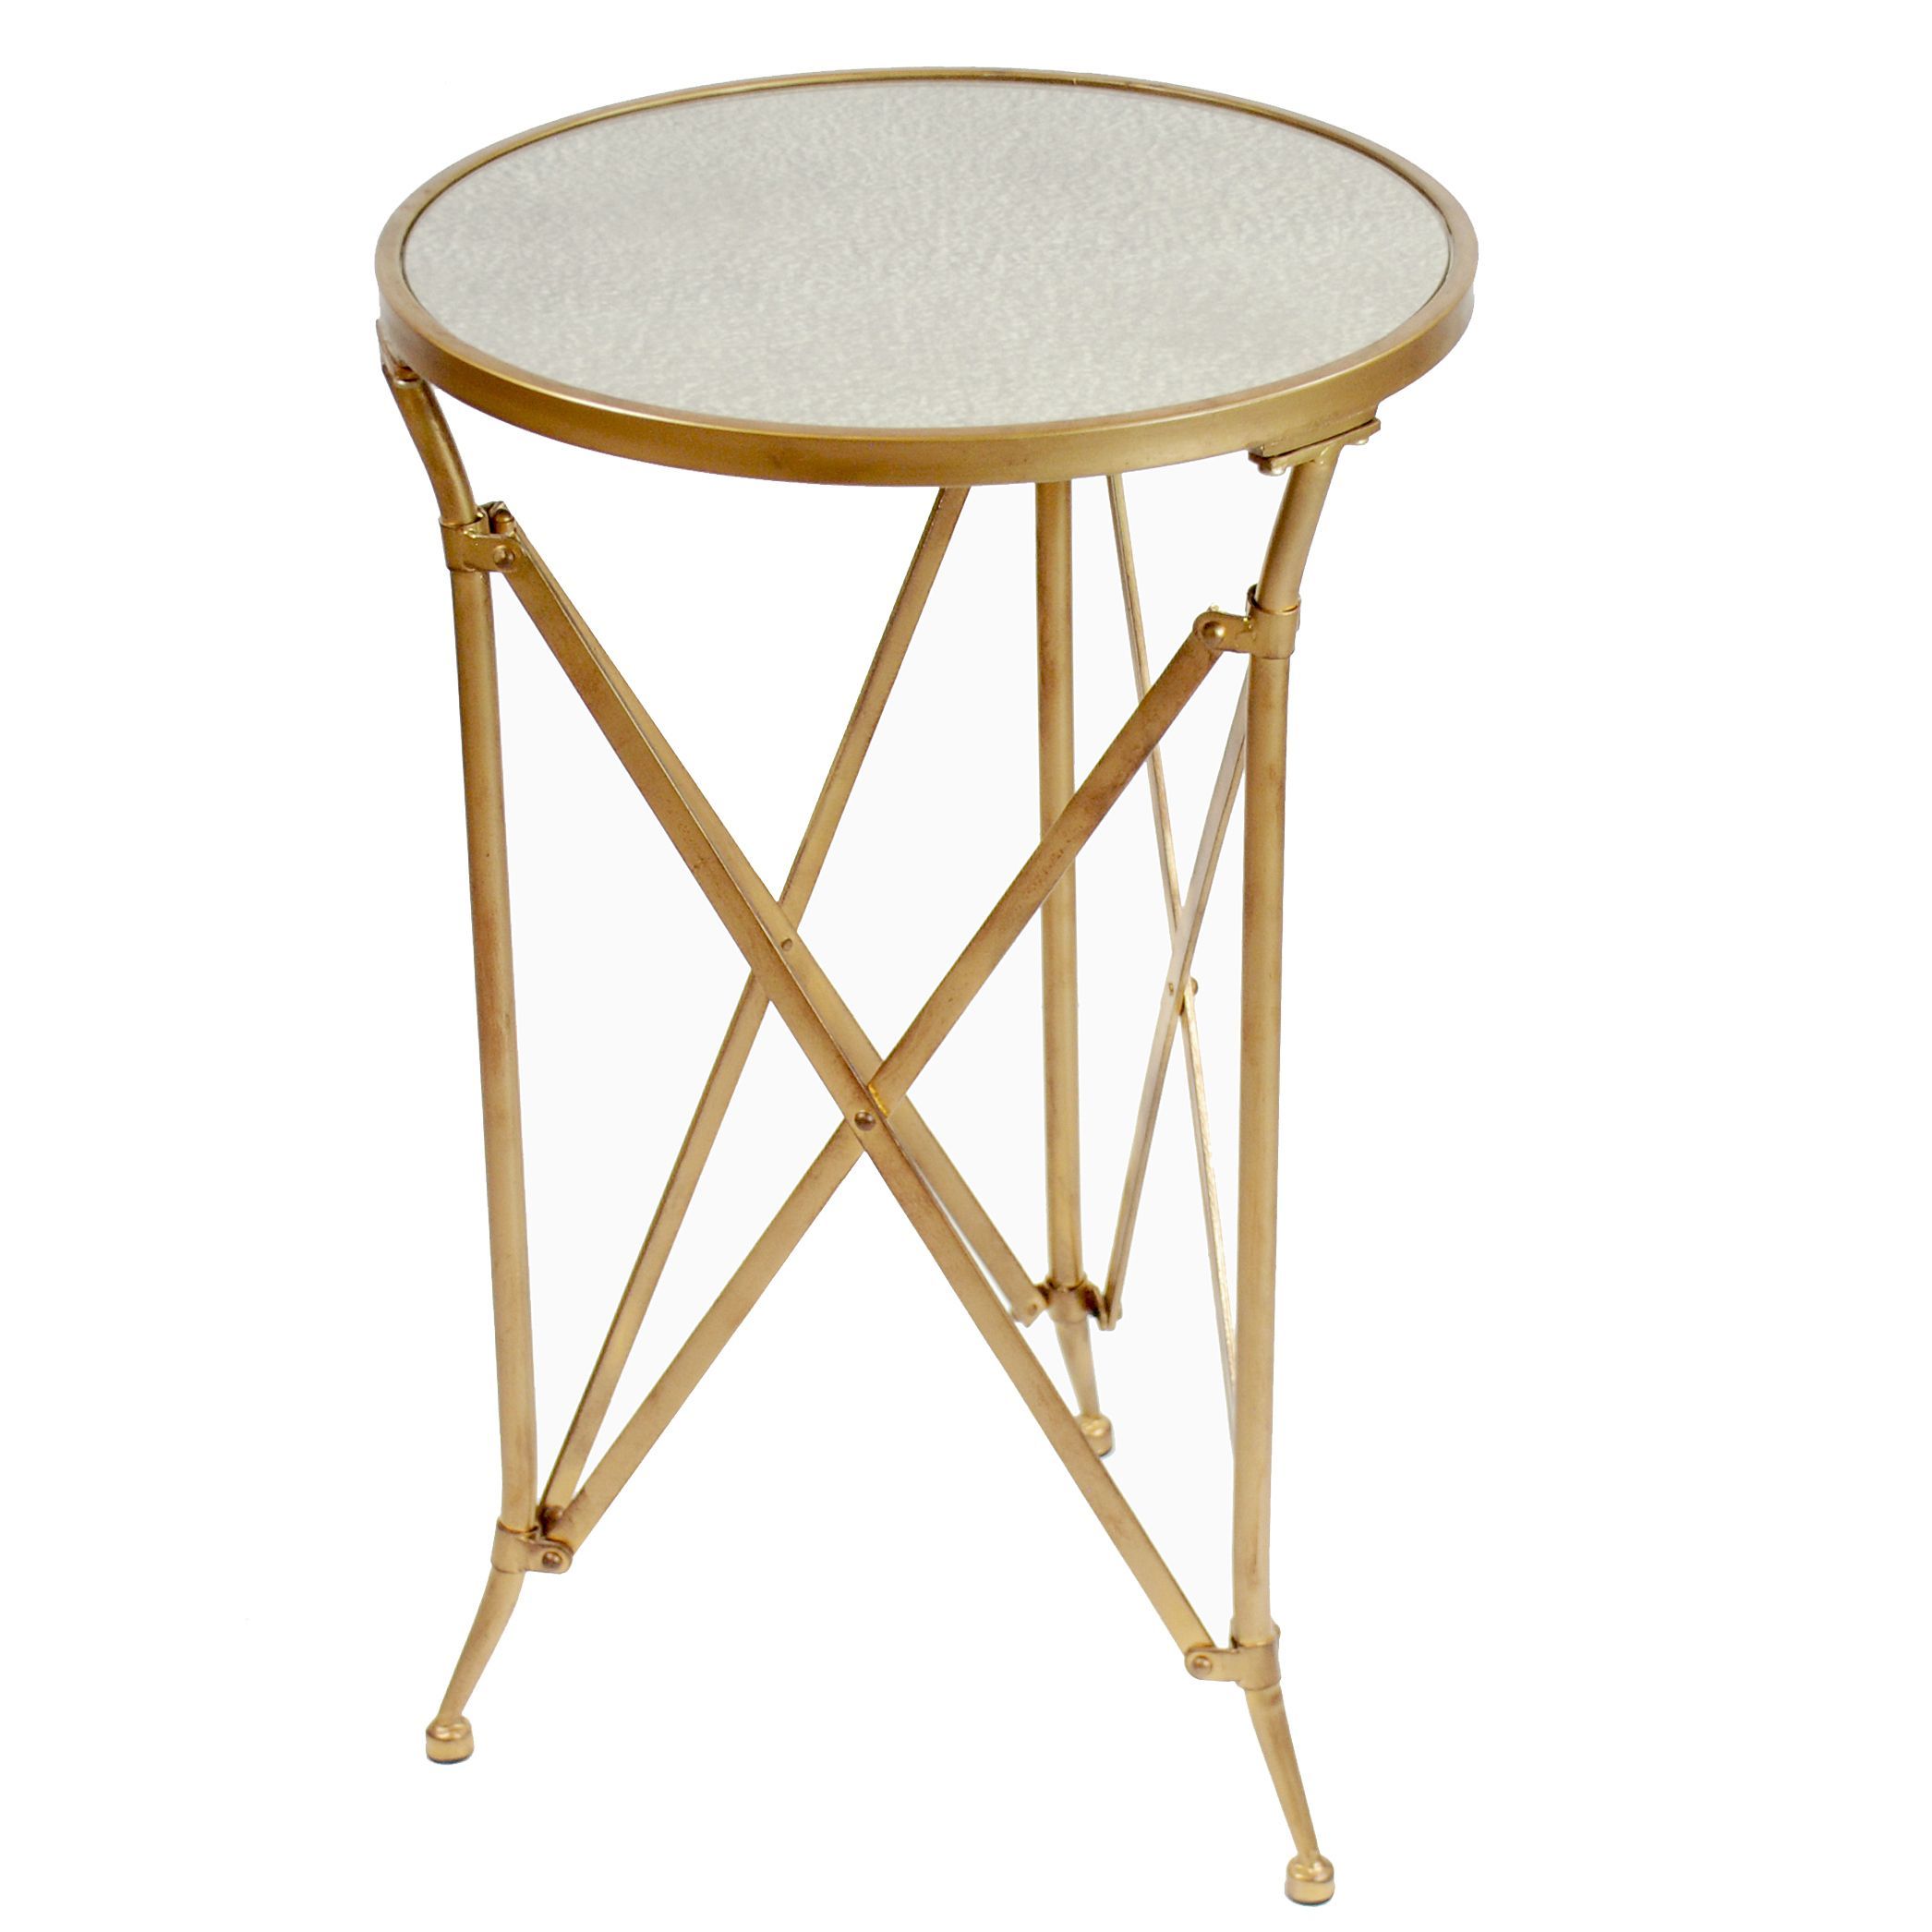 $18rround Accent Table With Antique Gold Metal Frame And Mercury Glass Regarding Antique Gold And Glass Console Tables (Gallery 20 of 20)